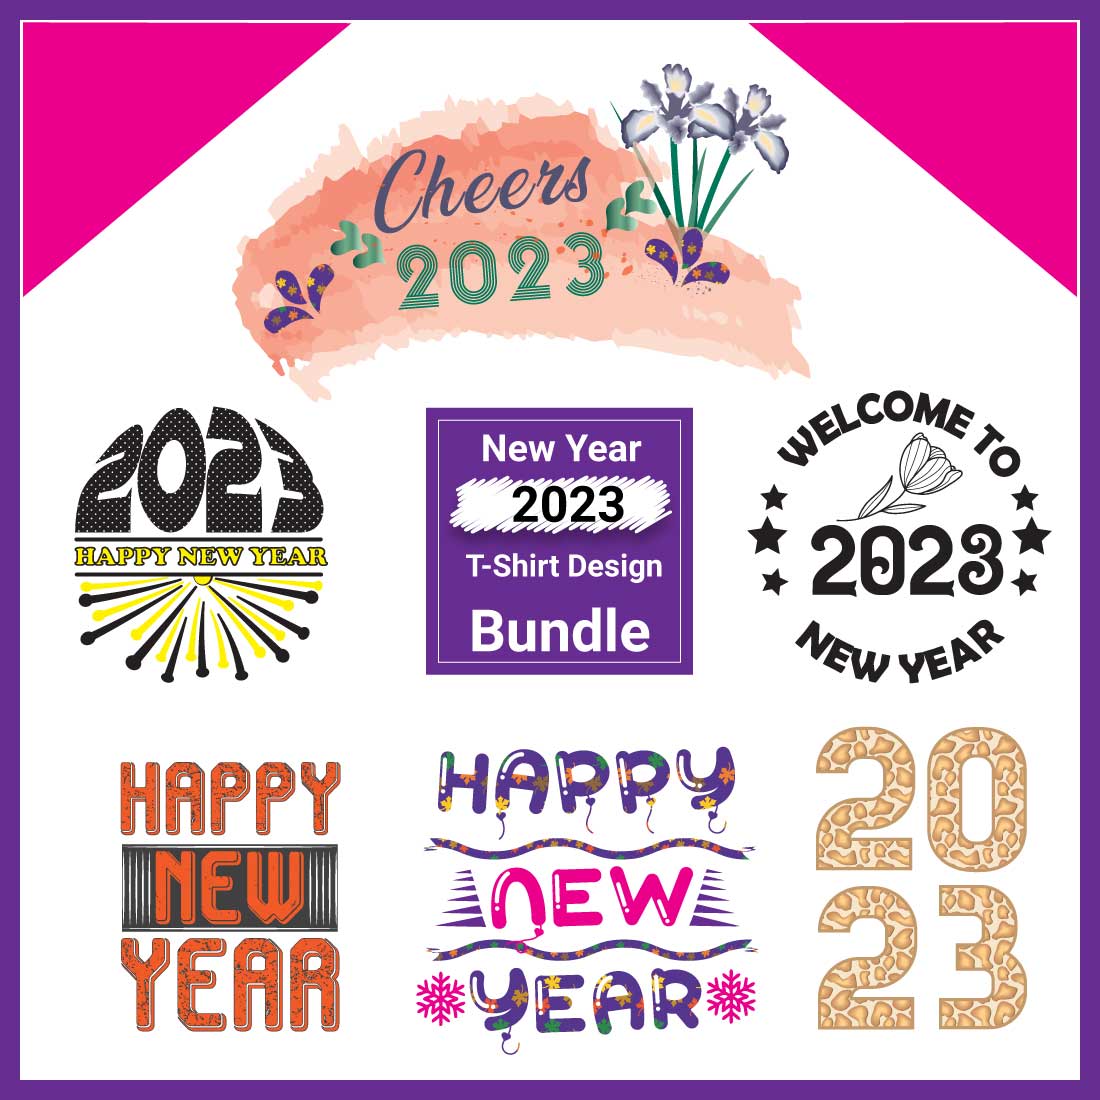 New Year 2023 T-Shirts Design Template cover image.